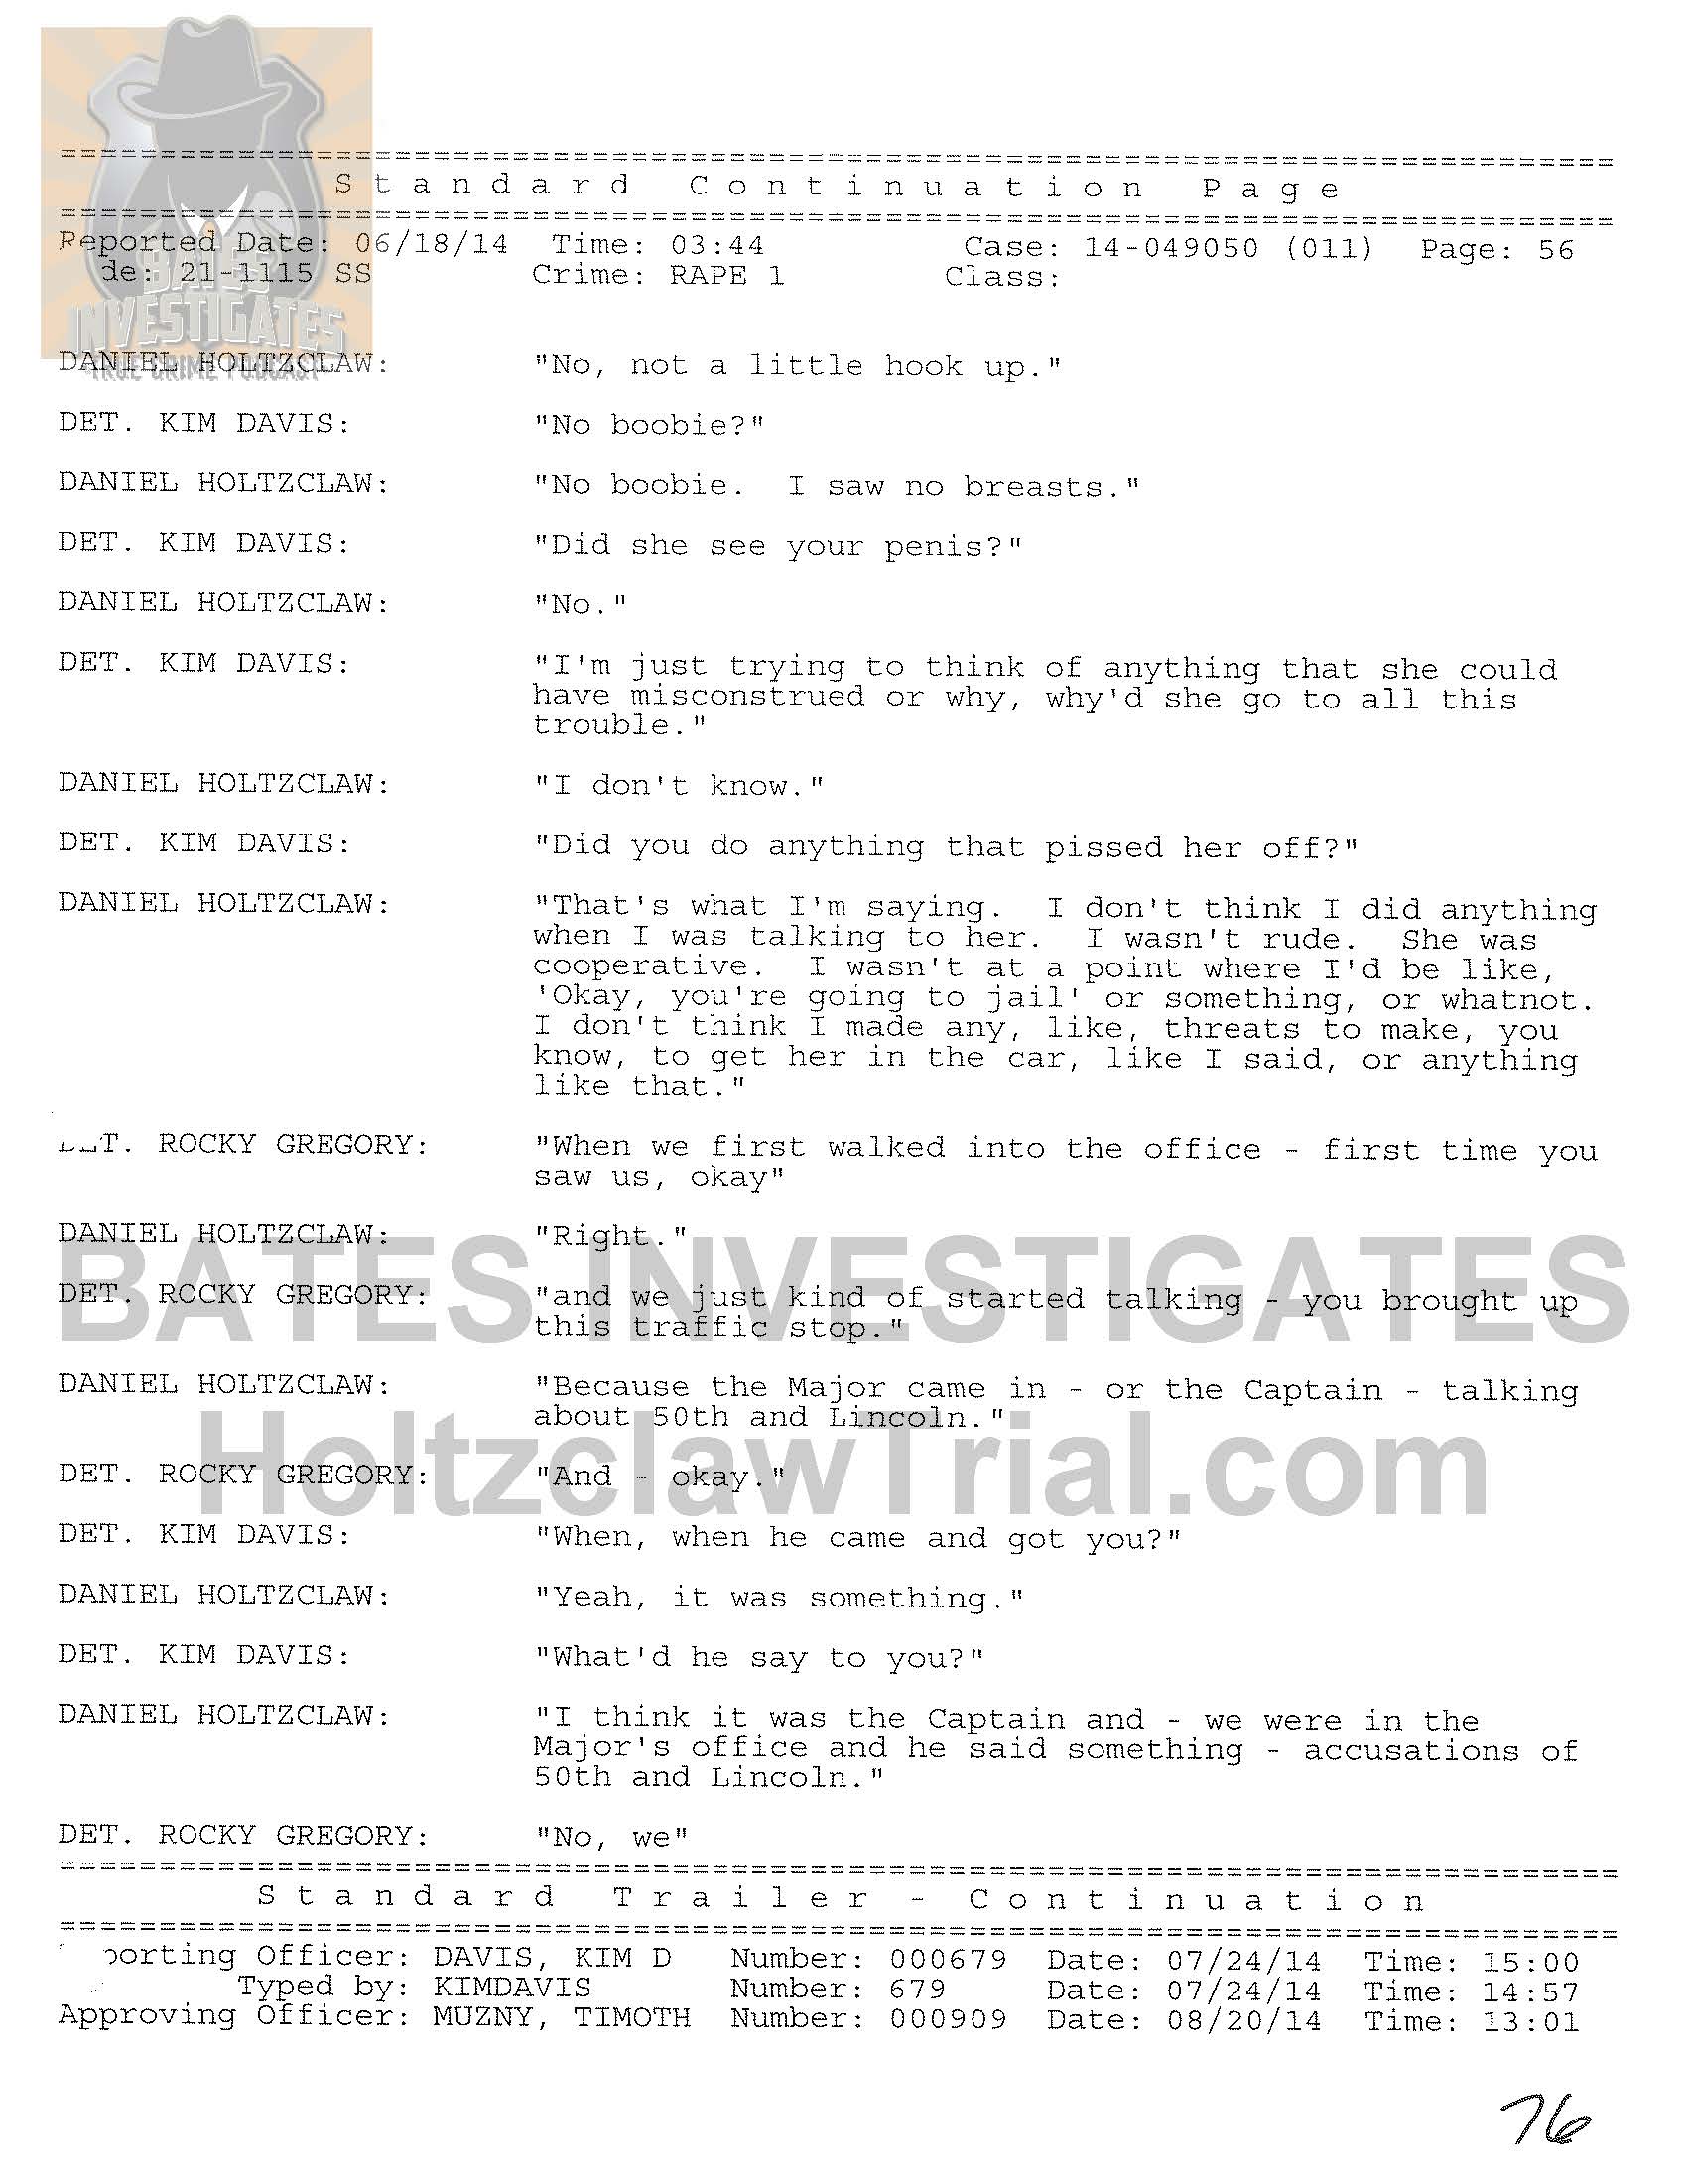 Holtzclaw Interrogation Transcript - Ep02 Redacted_Page_56.jpg